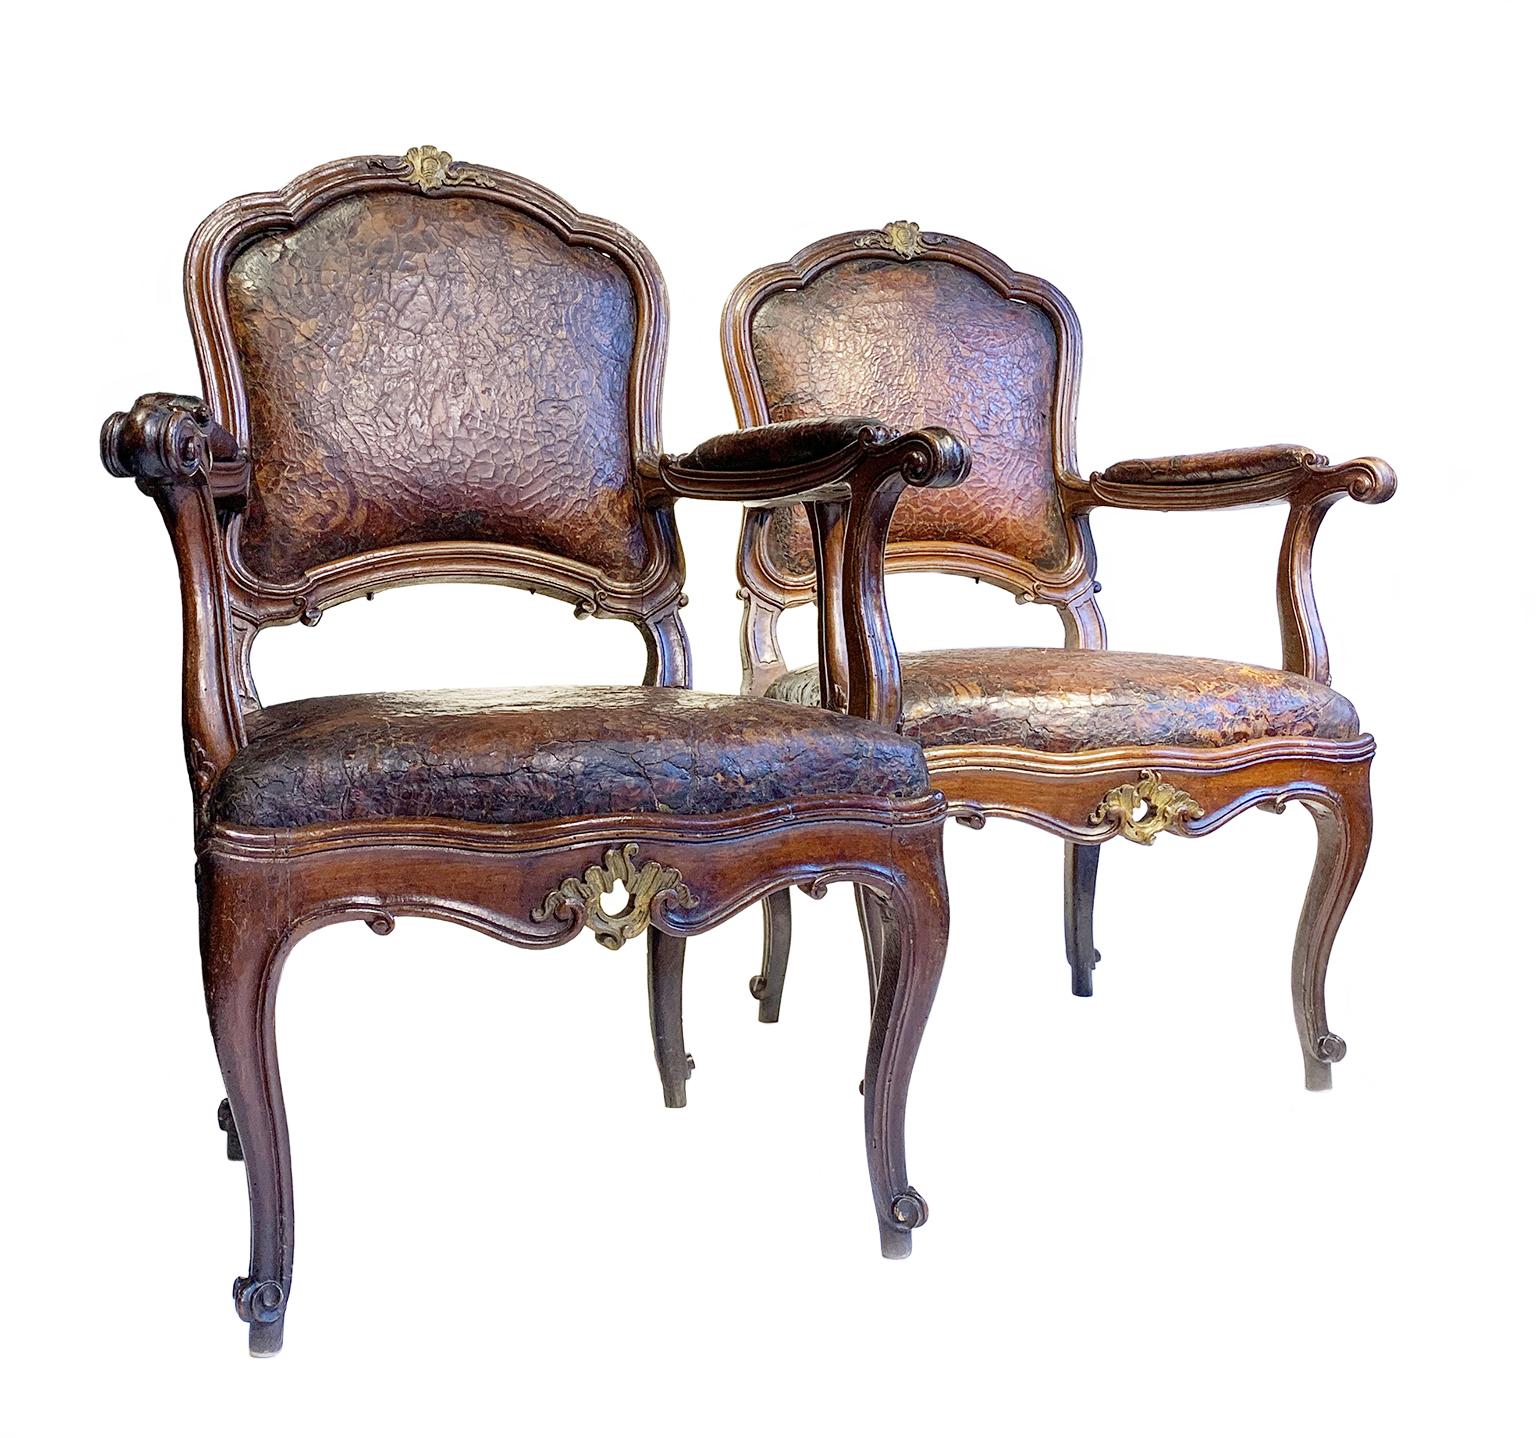 Rococo Mid-18th Century Italian Pair of Armchairs with Leather Covers, Milan circa 1750 For Sale